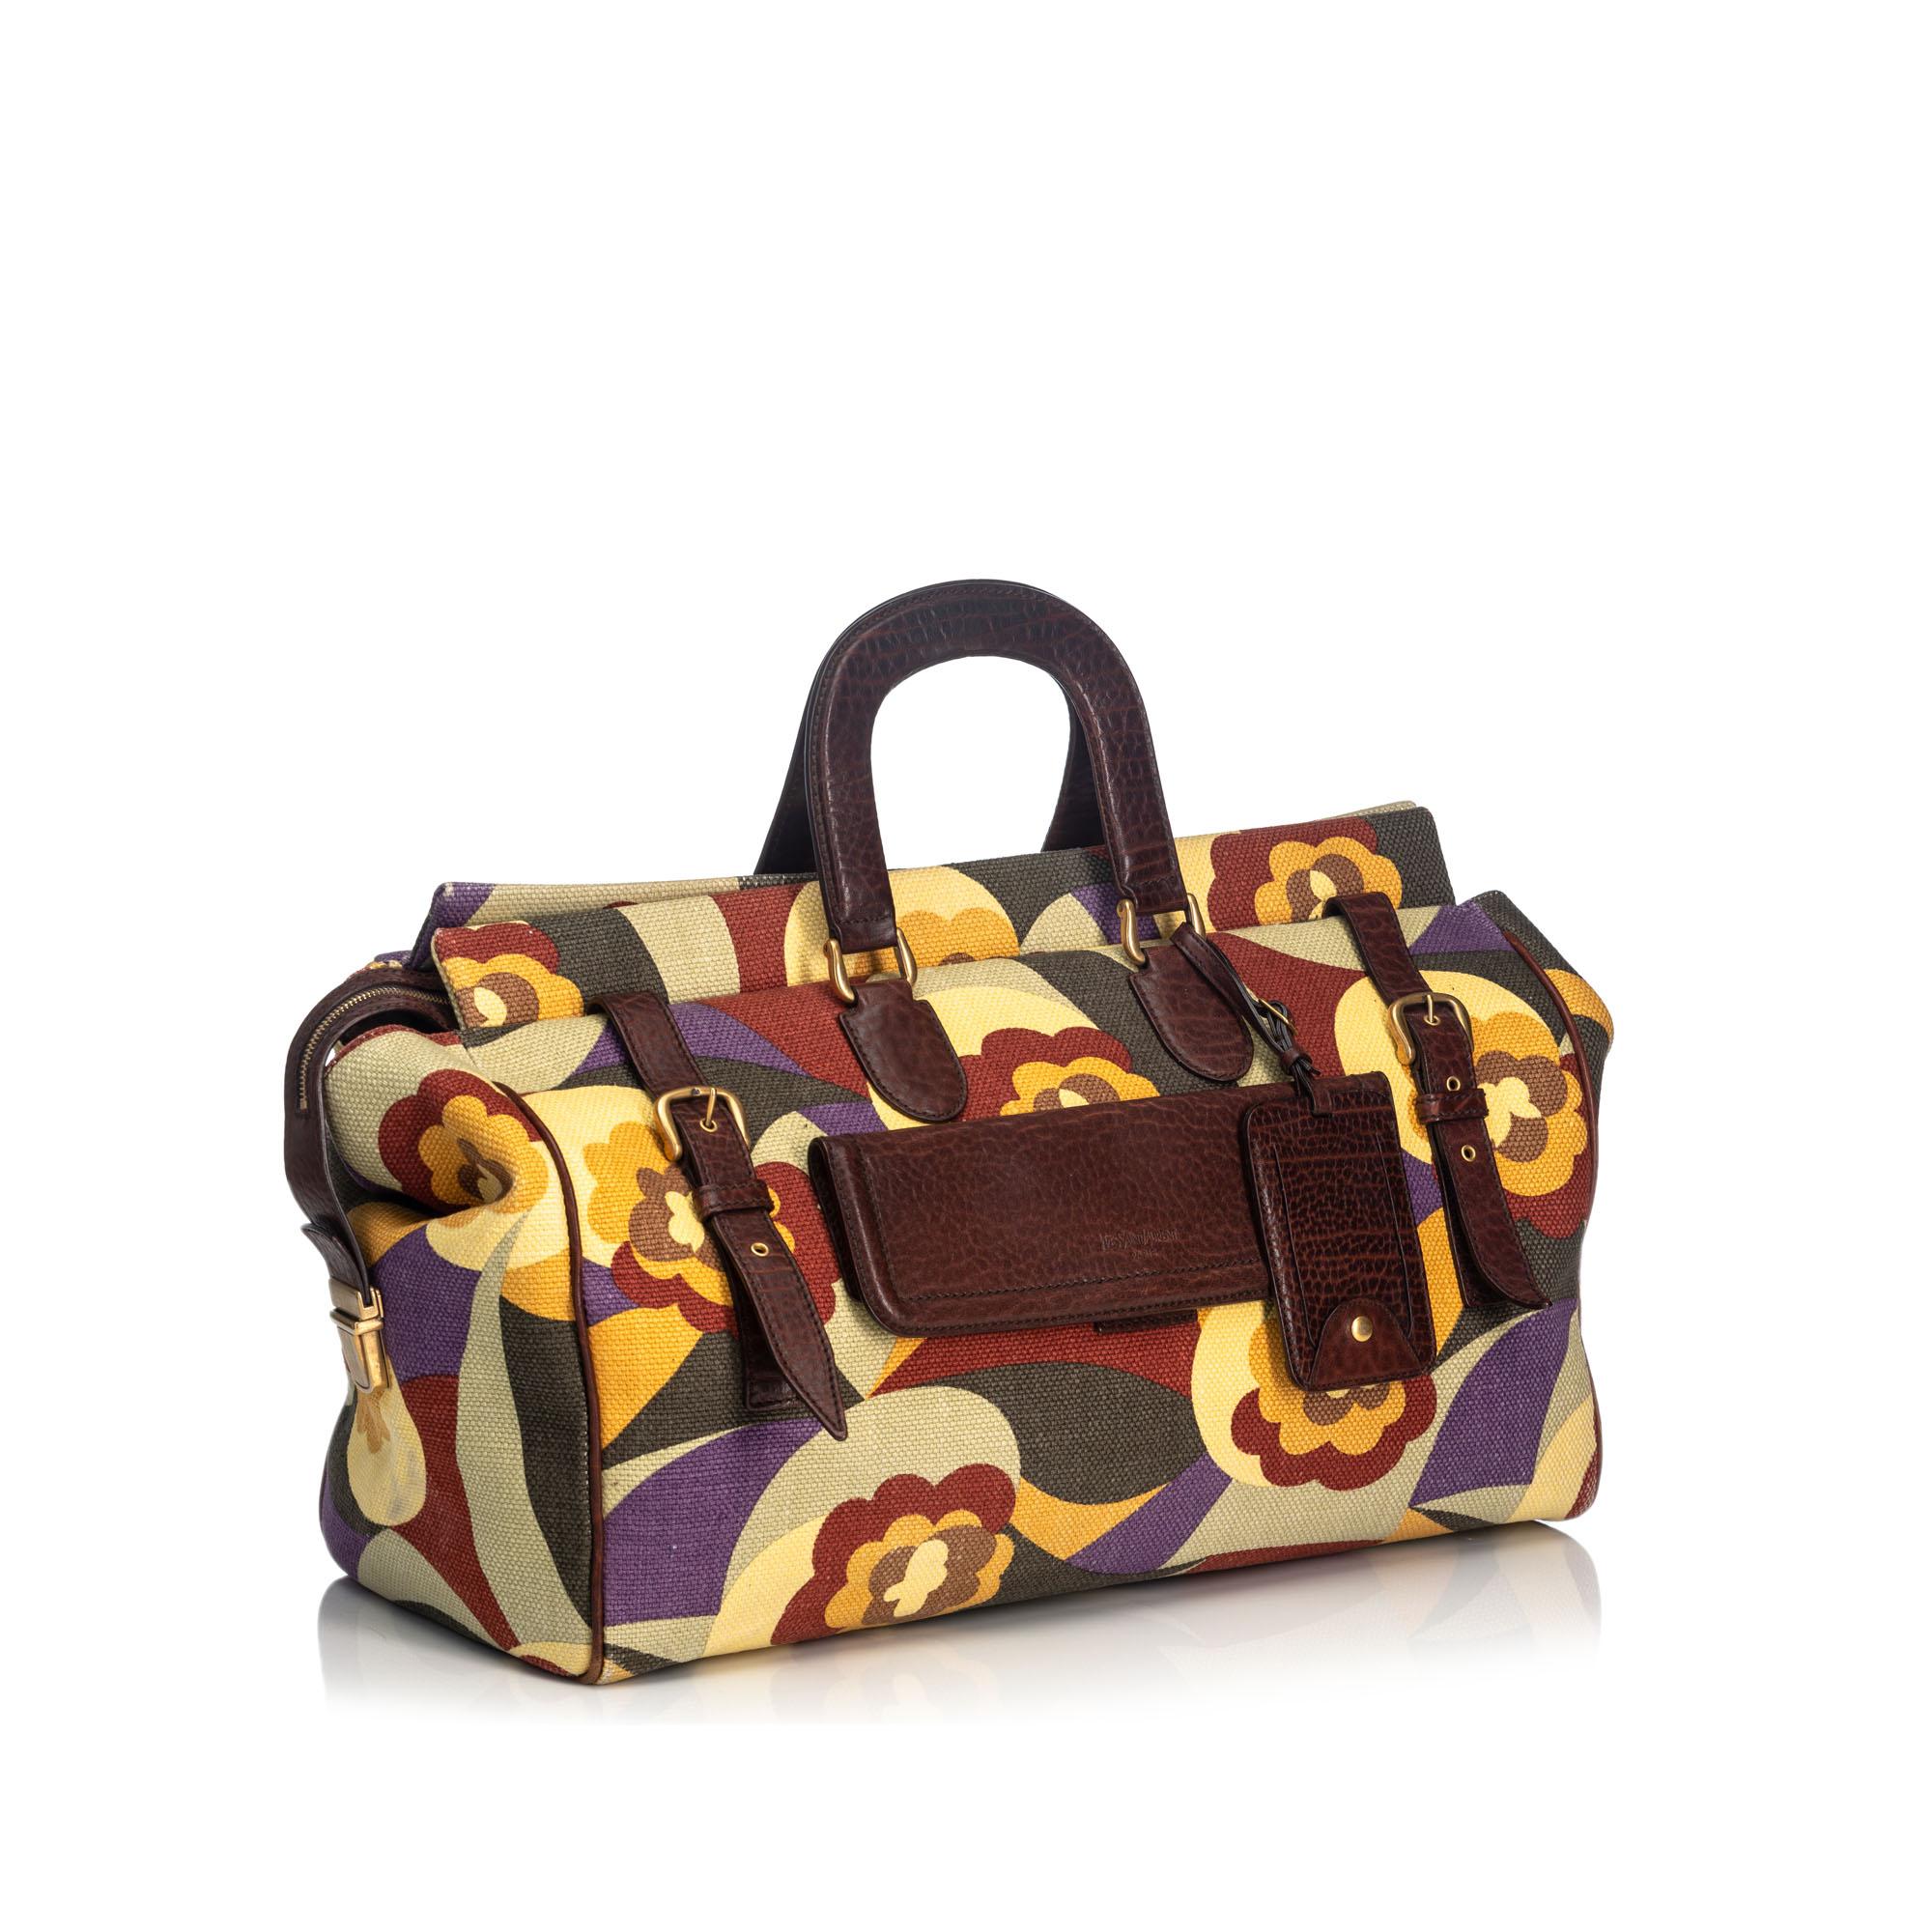 This travel bag features a canvas body, a front exterior flap pocket, a leather top handle, a top zip closure, and an interior zip pocket. It carries as B+ condition rating.

Inclusions: 
This item does not come with inclusions.

Dimensions:
Length: